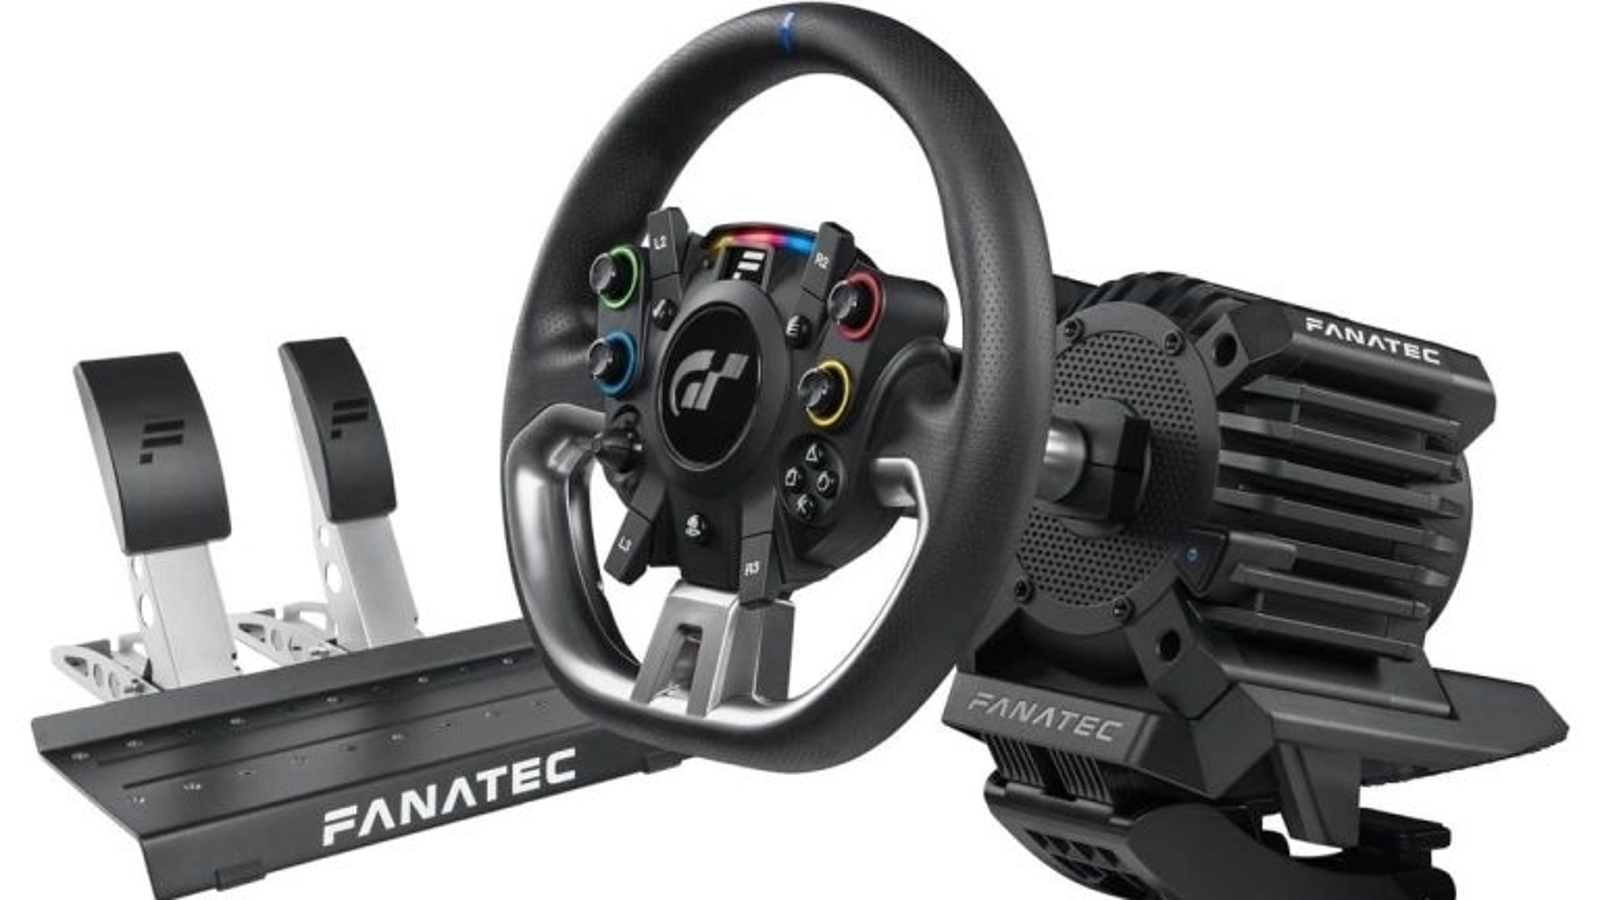 Gran Turismo 7 gets an official wheel, and it's the first direct